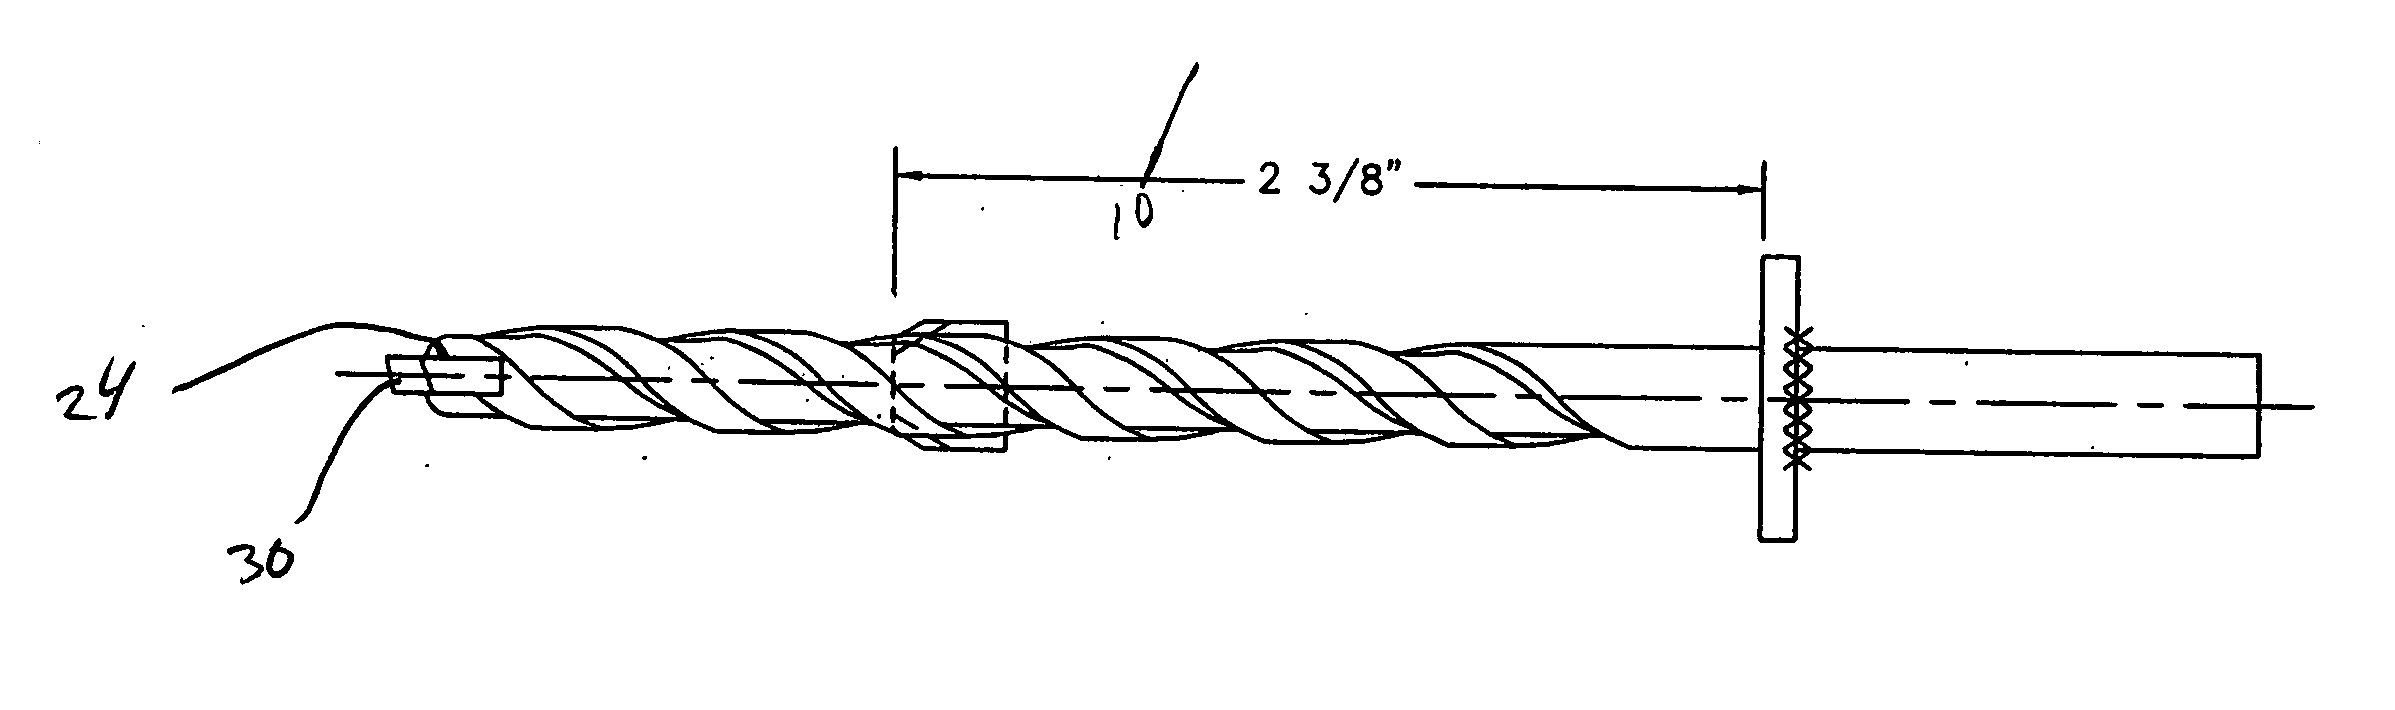 Anchoring drill bit, system and method of anchoring